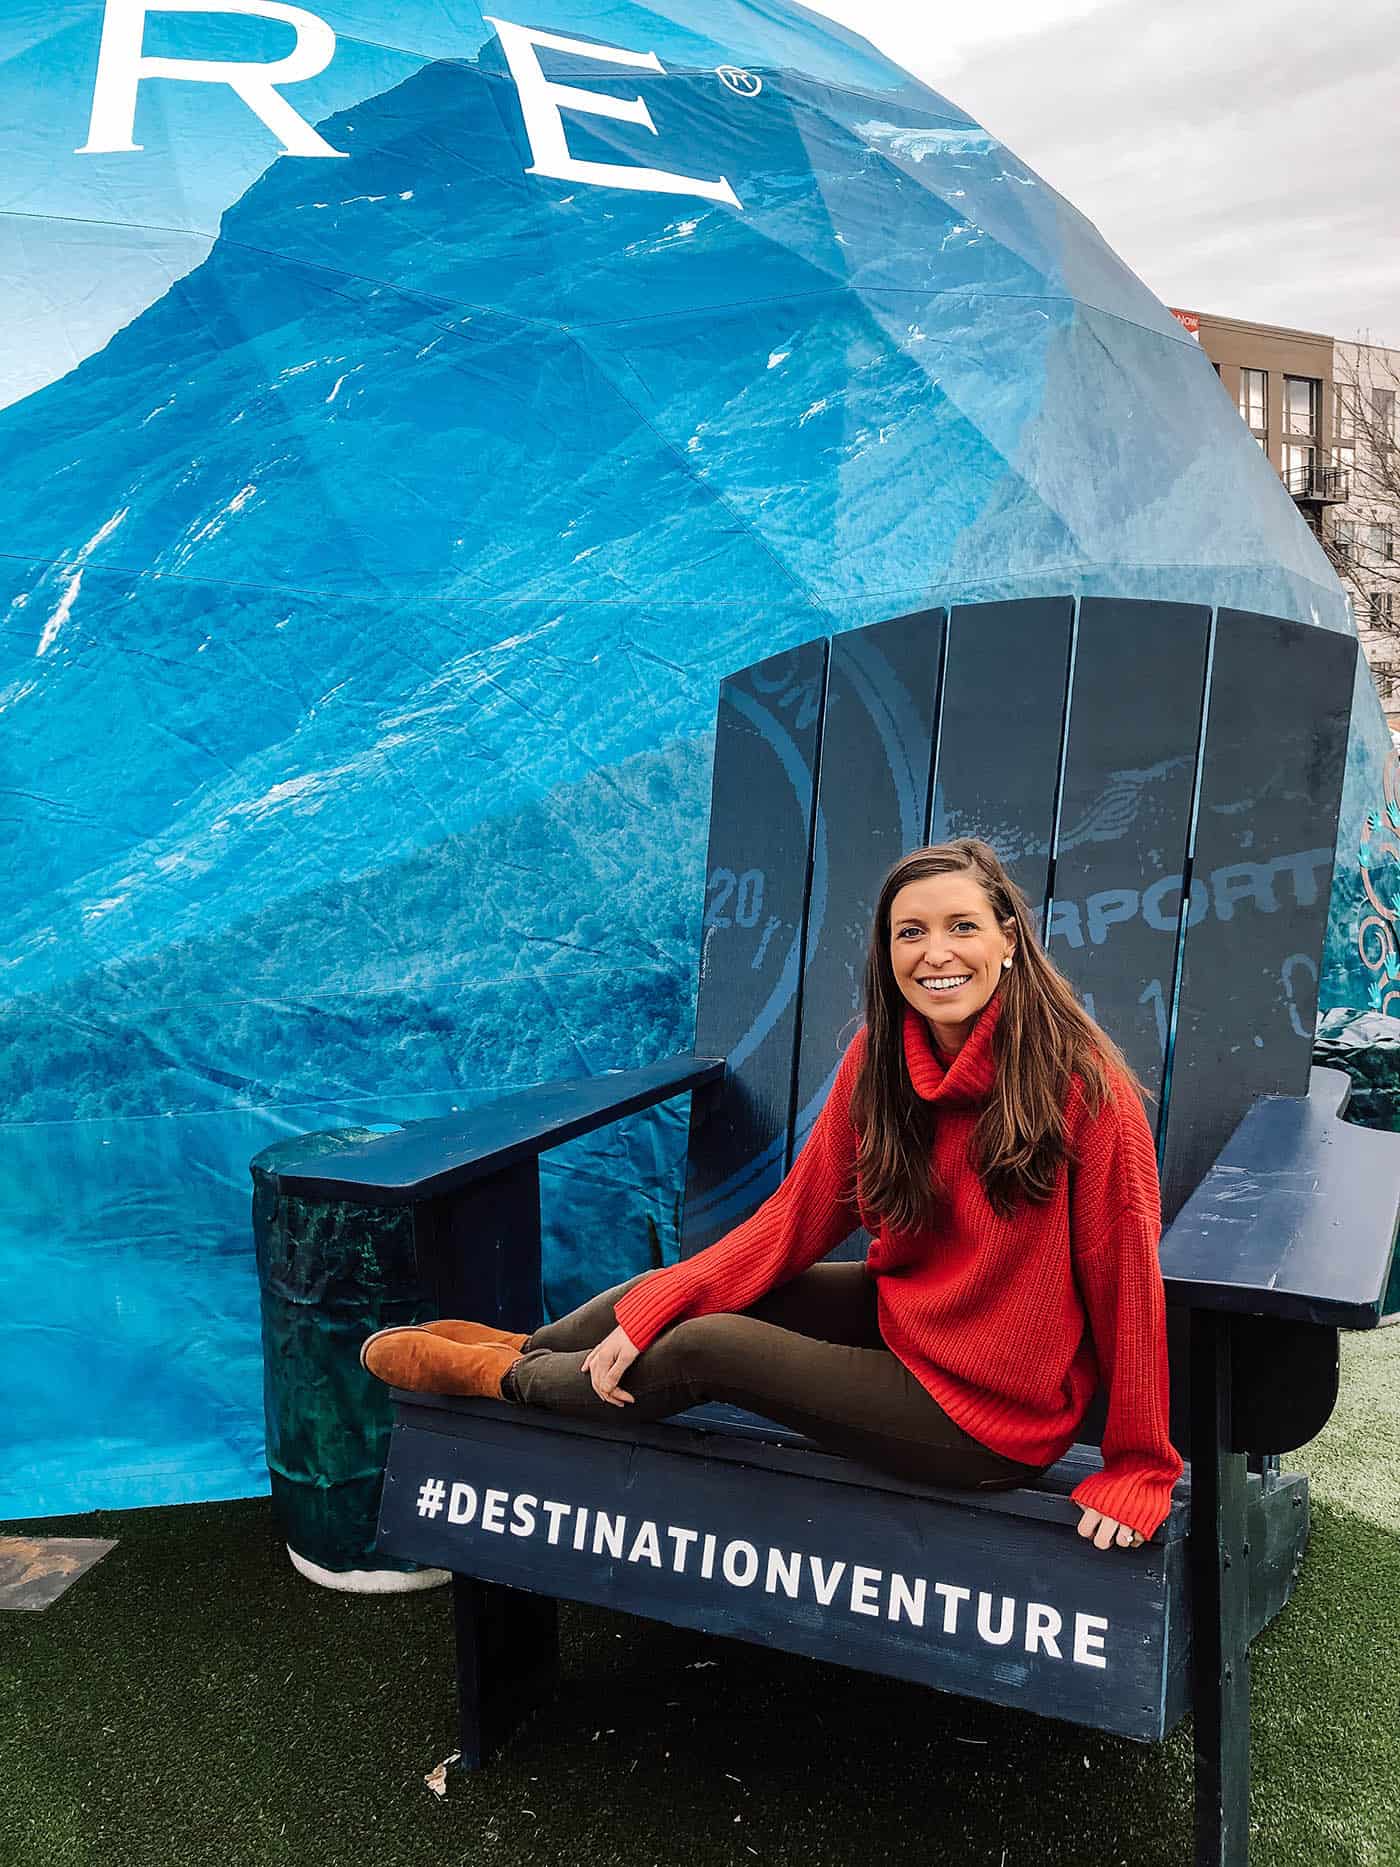 Winter Adventures with Capital One Venture Card